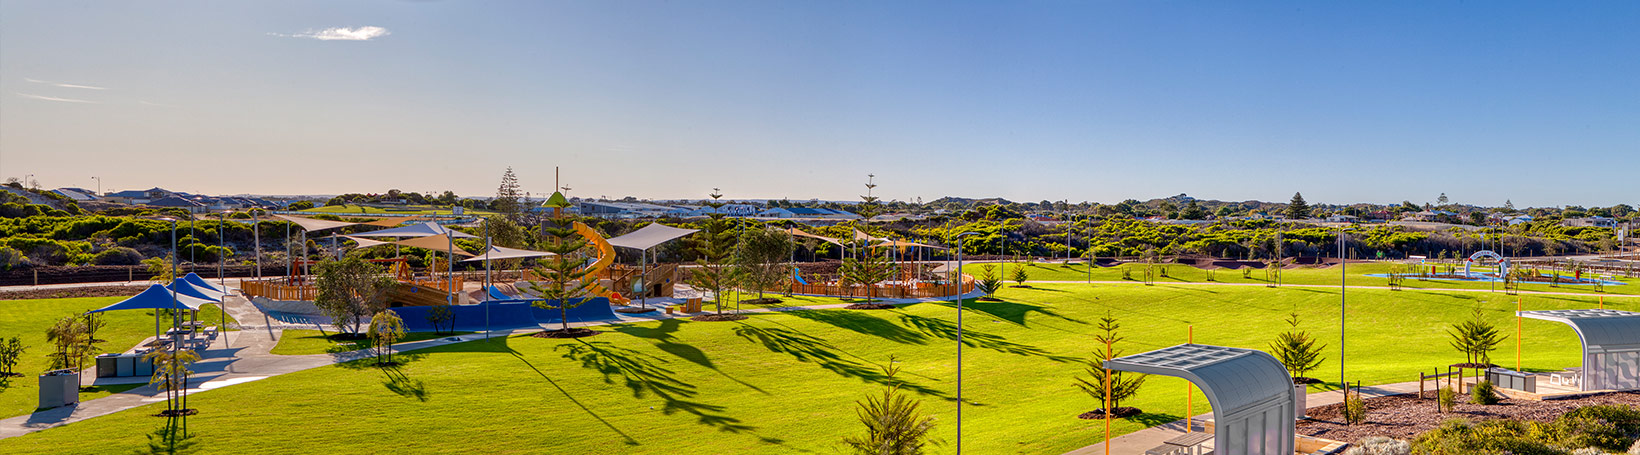 Golden Bay Parks and Plagrounds